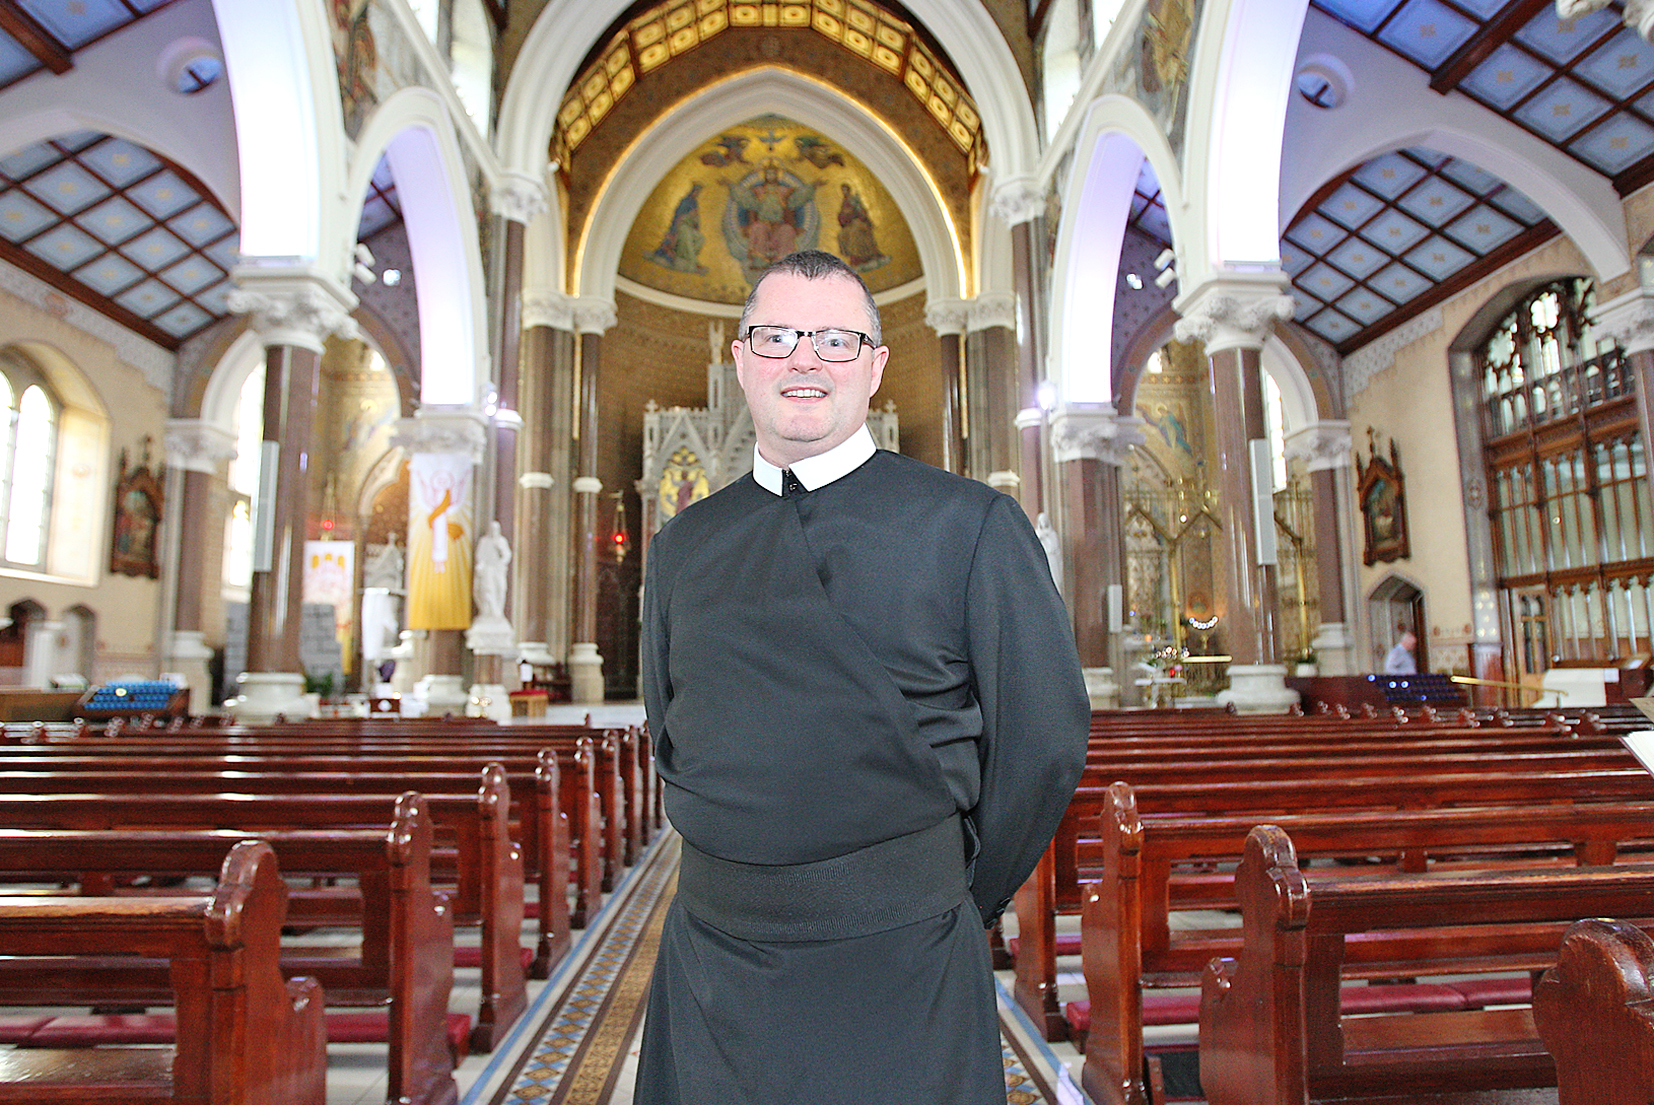 Fr Kehoe is looking forward to the Clonard Solemn Novena which starts next week